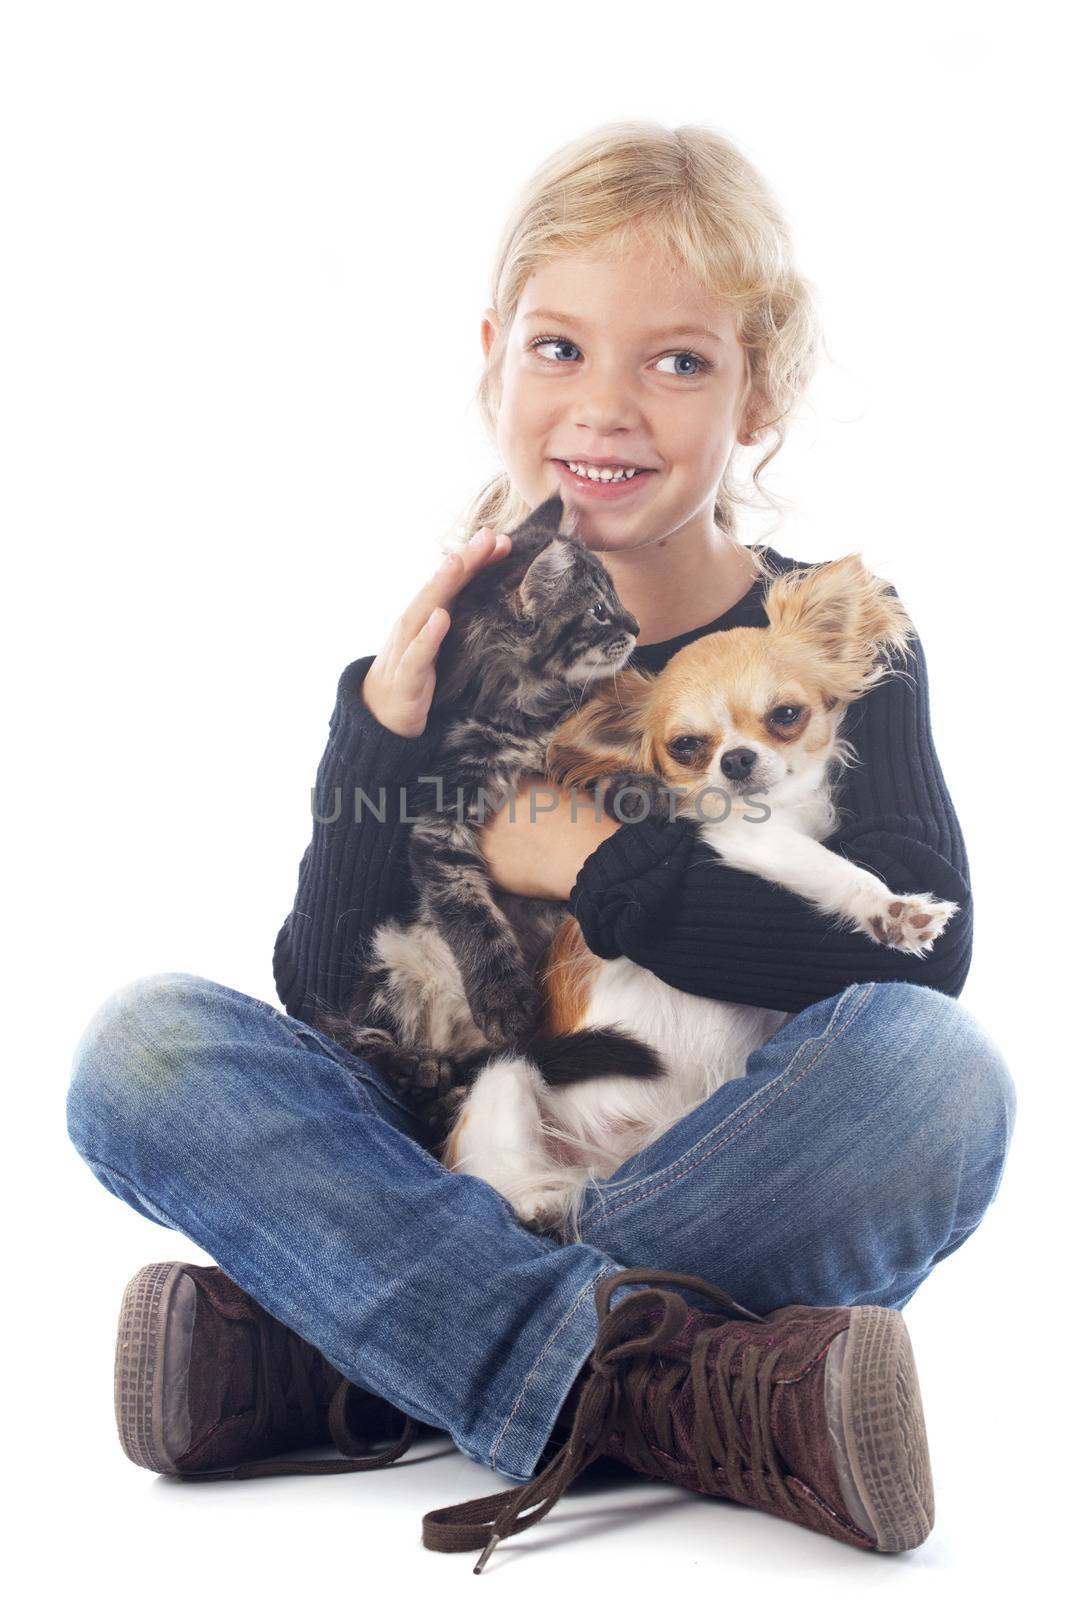 child and chihuahua by cynoclub